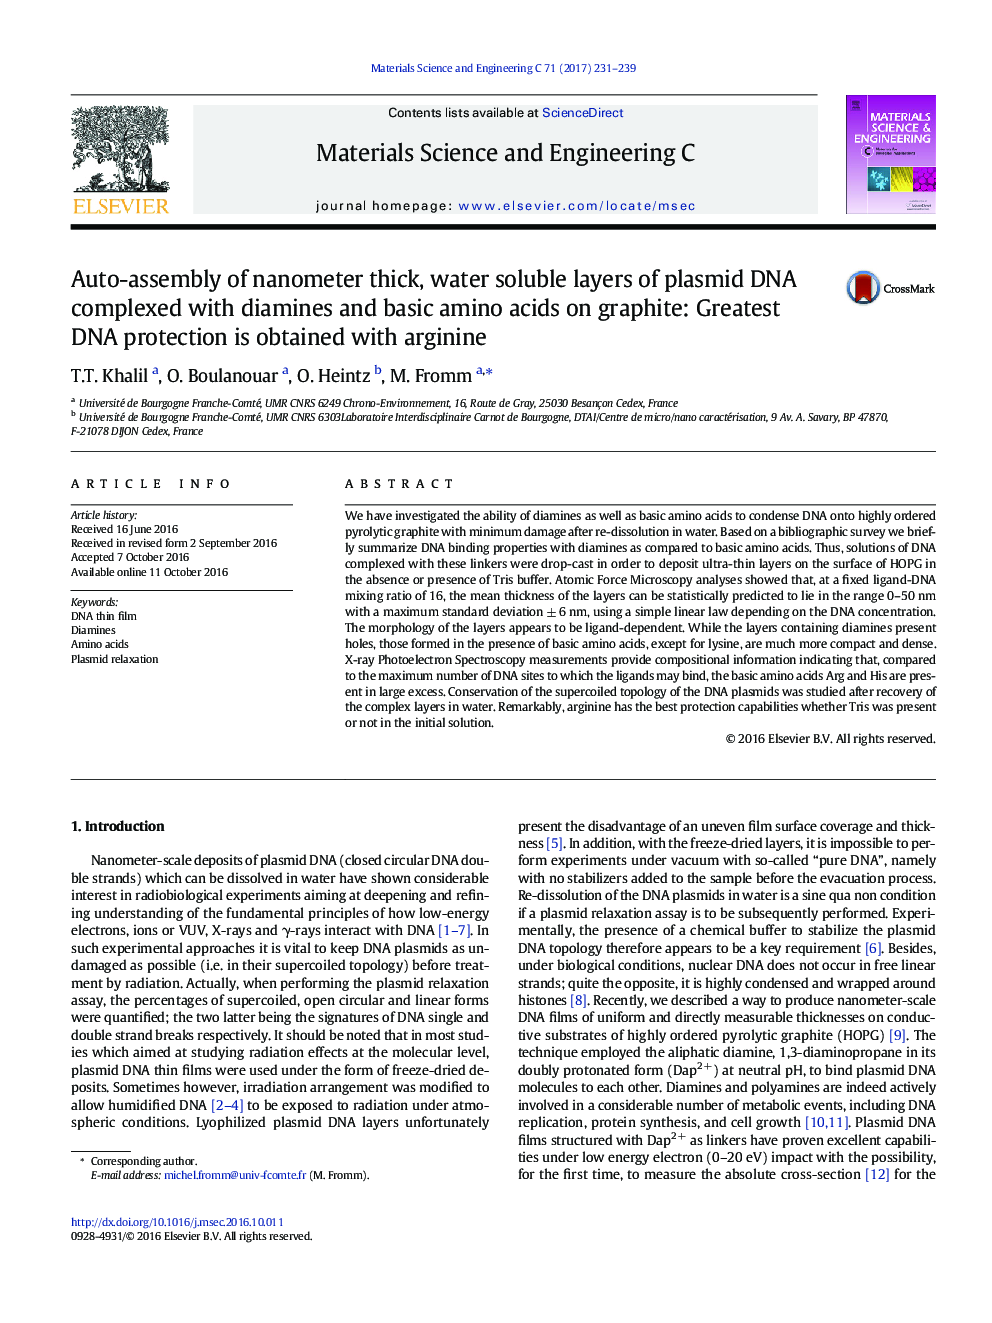 Auto-assembly of nanometer thick, water soluble layers of plasmid DNA complexed with diamines and basic amino acids on graphite: Greatest DNA protection is obtained with arginine